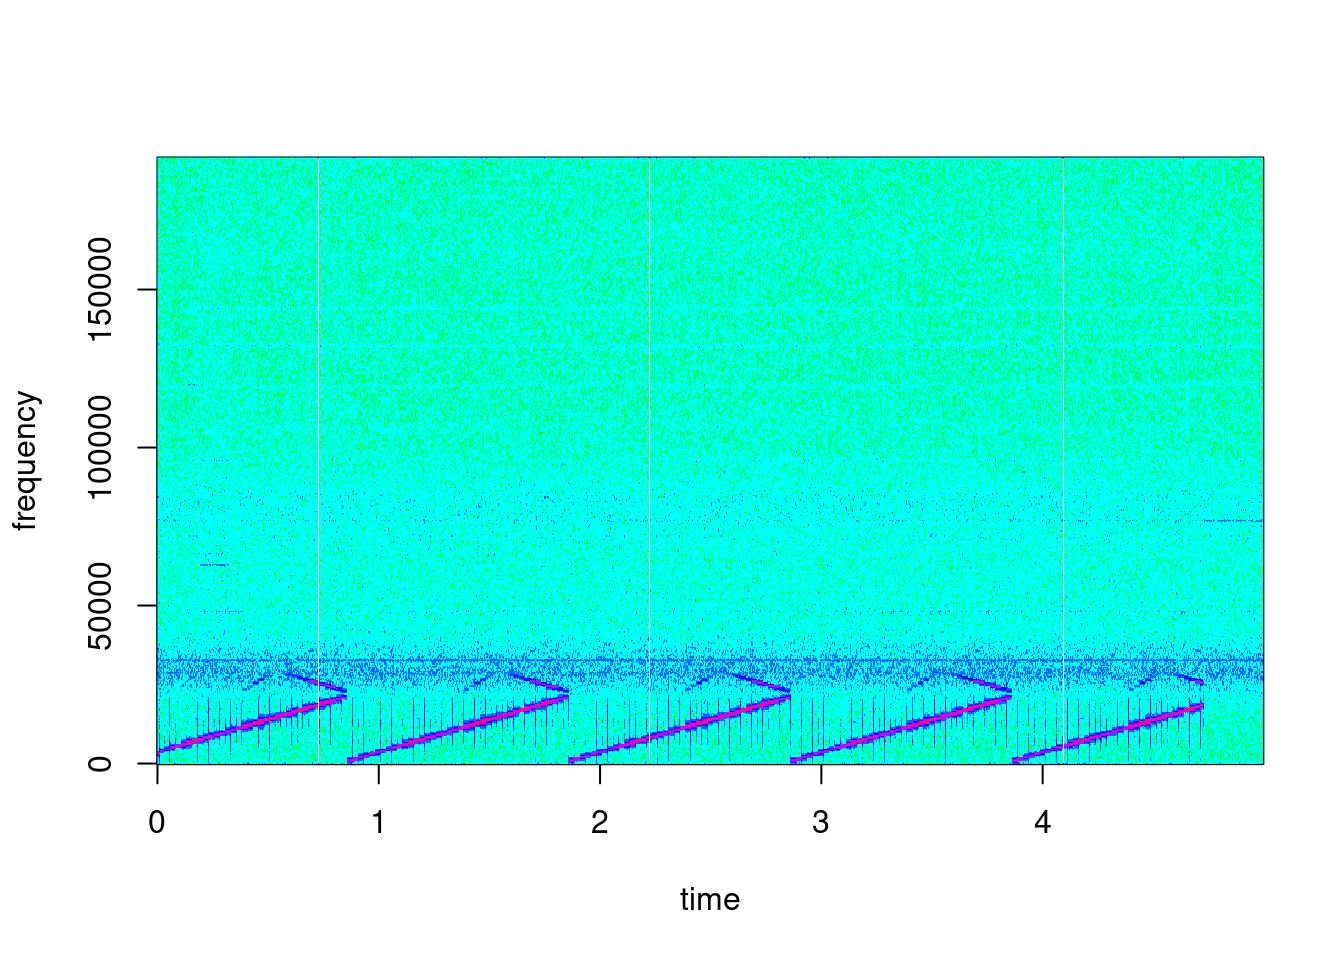 Complete spectrogram of the recorded test file